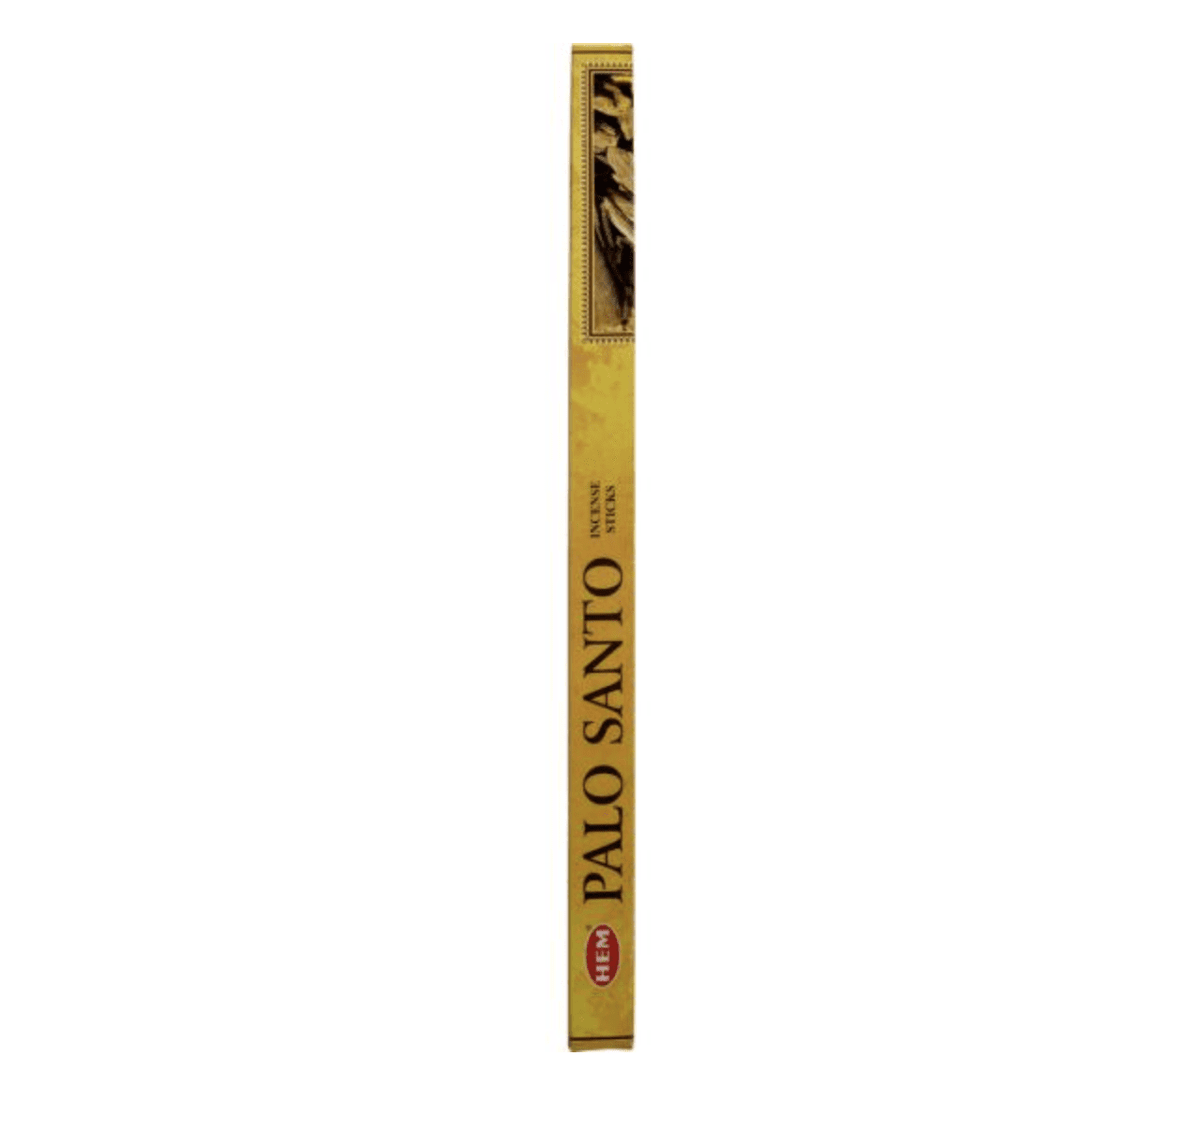 Hem Palo Santo Incense Sticks (Pack of 3) Made of of Natural Ingredients and Fragrances | My Little Magic Shop